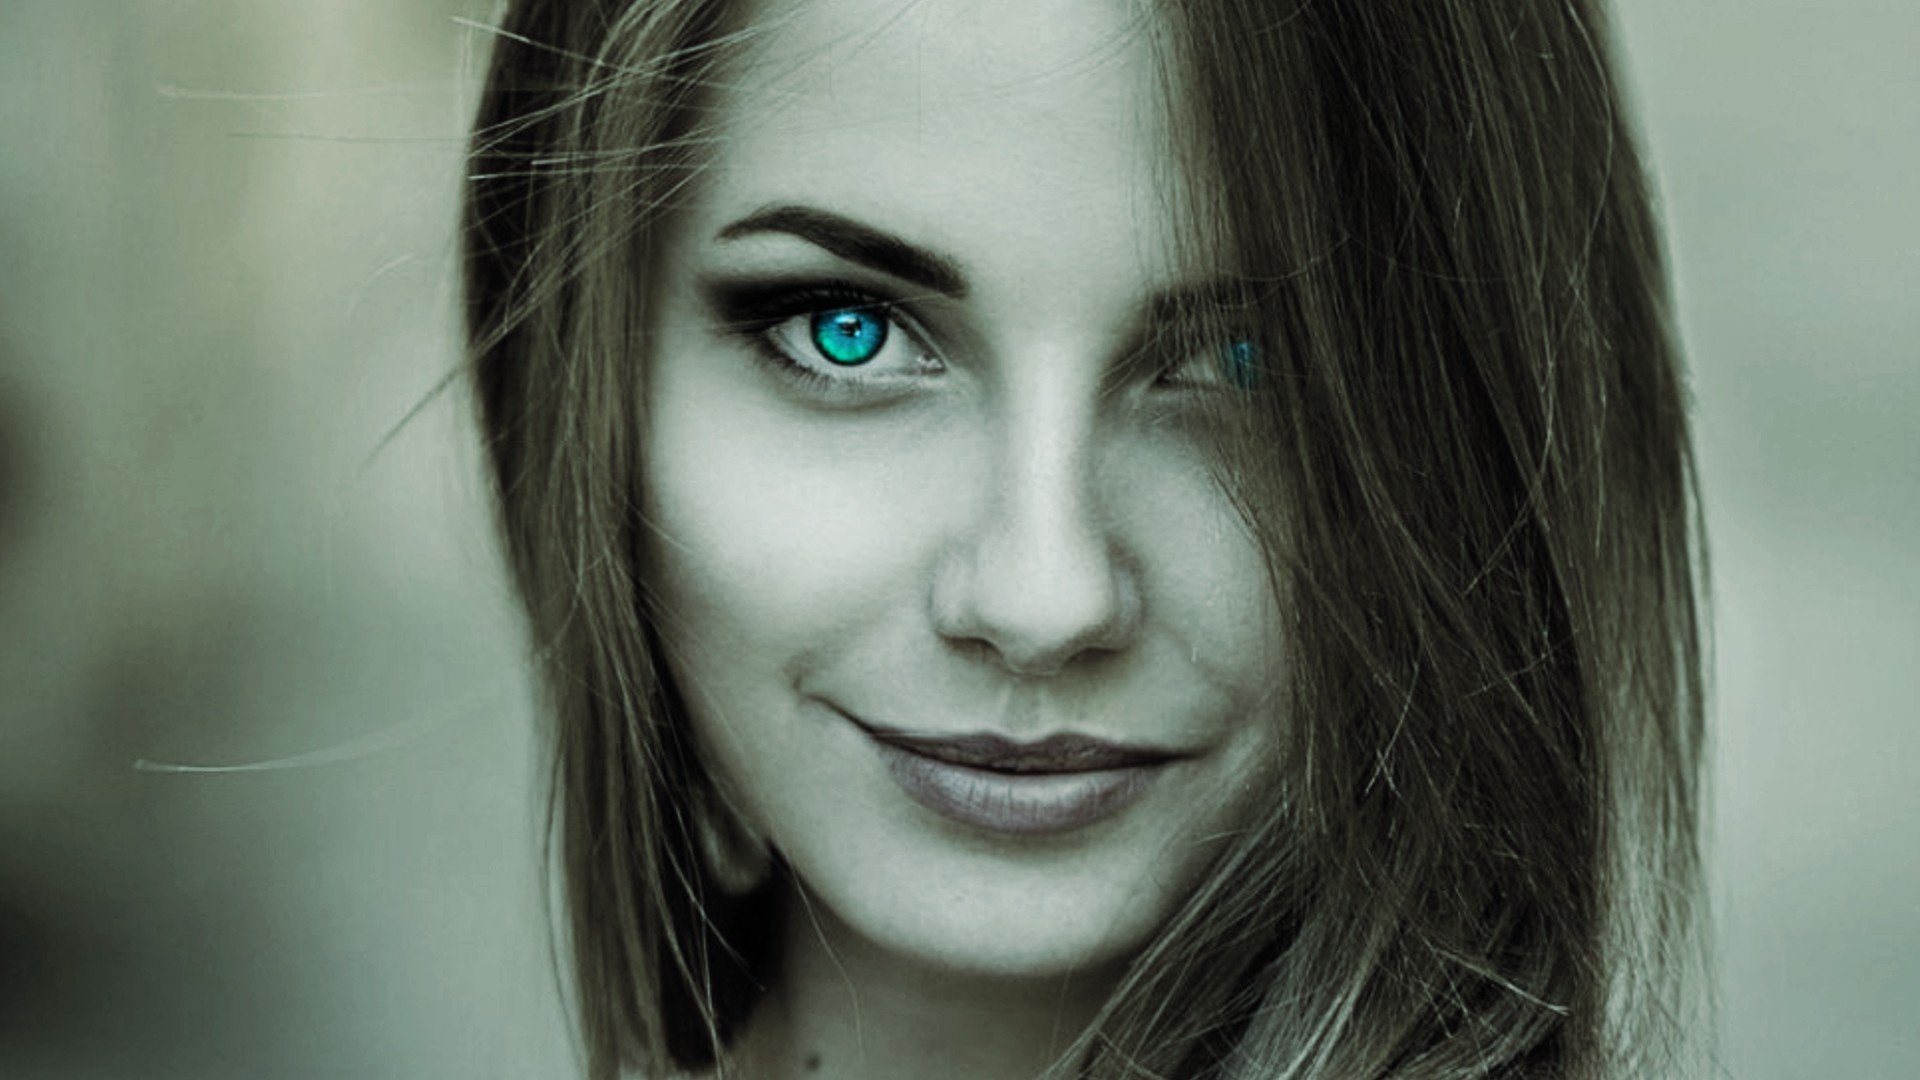 face, Women, Smiling, Selective coloring, Turquoise eyes, Brunette, Closeup Wallpaper